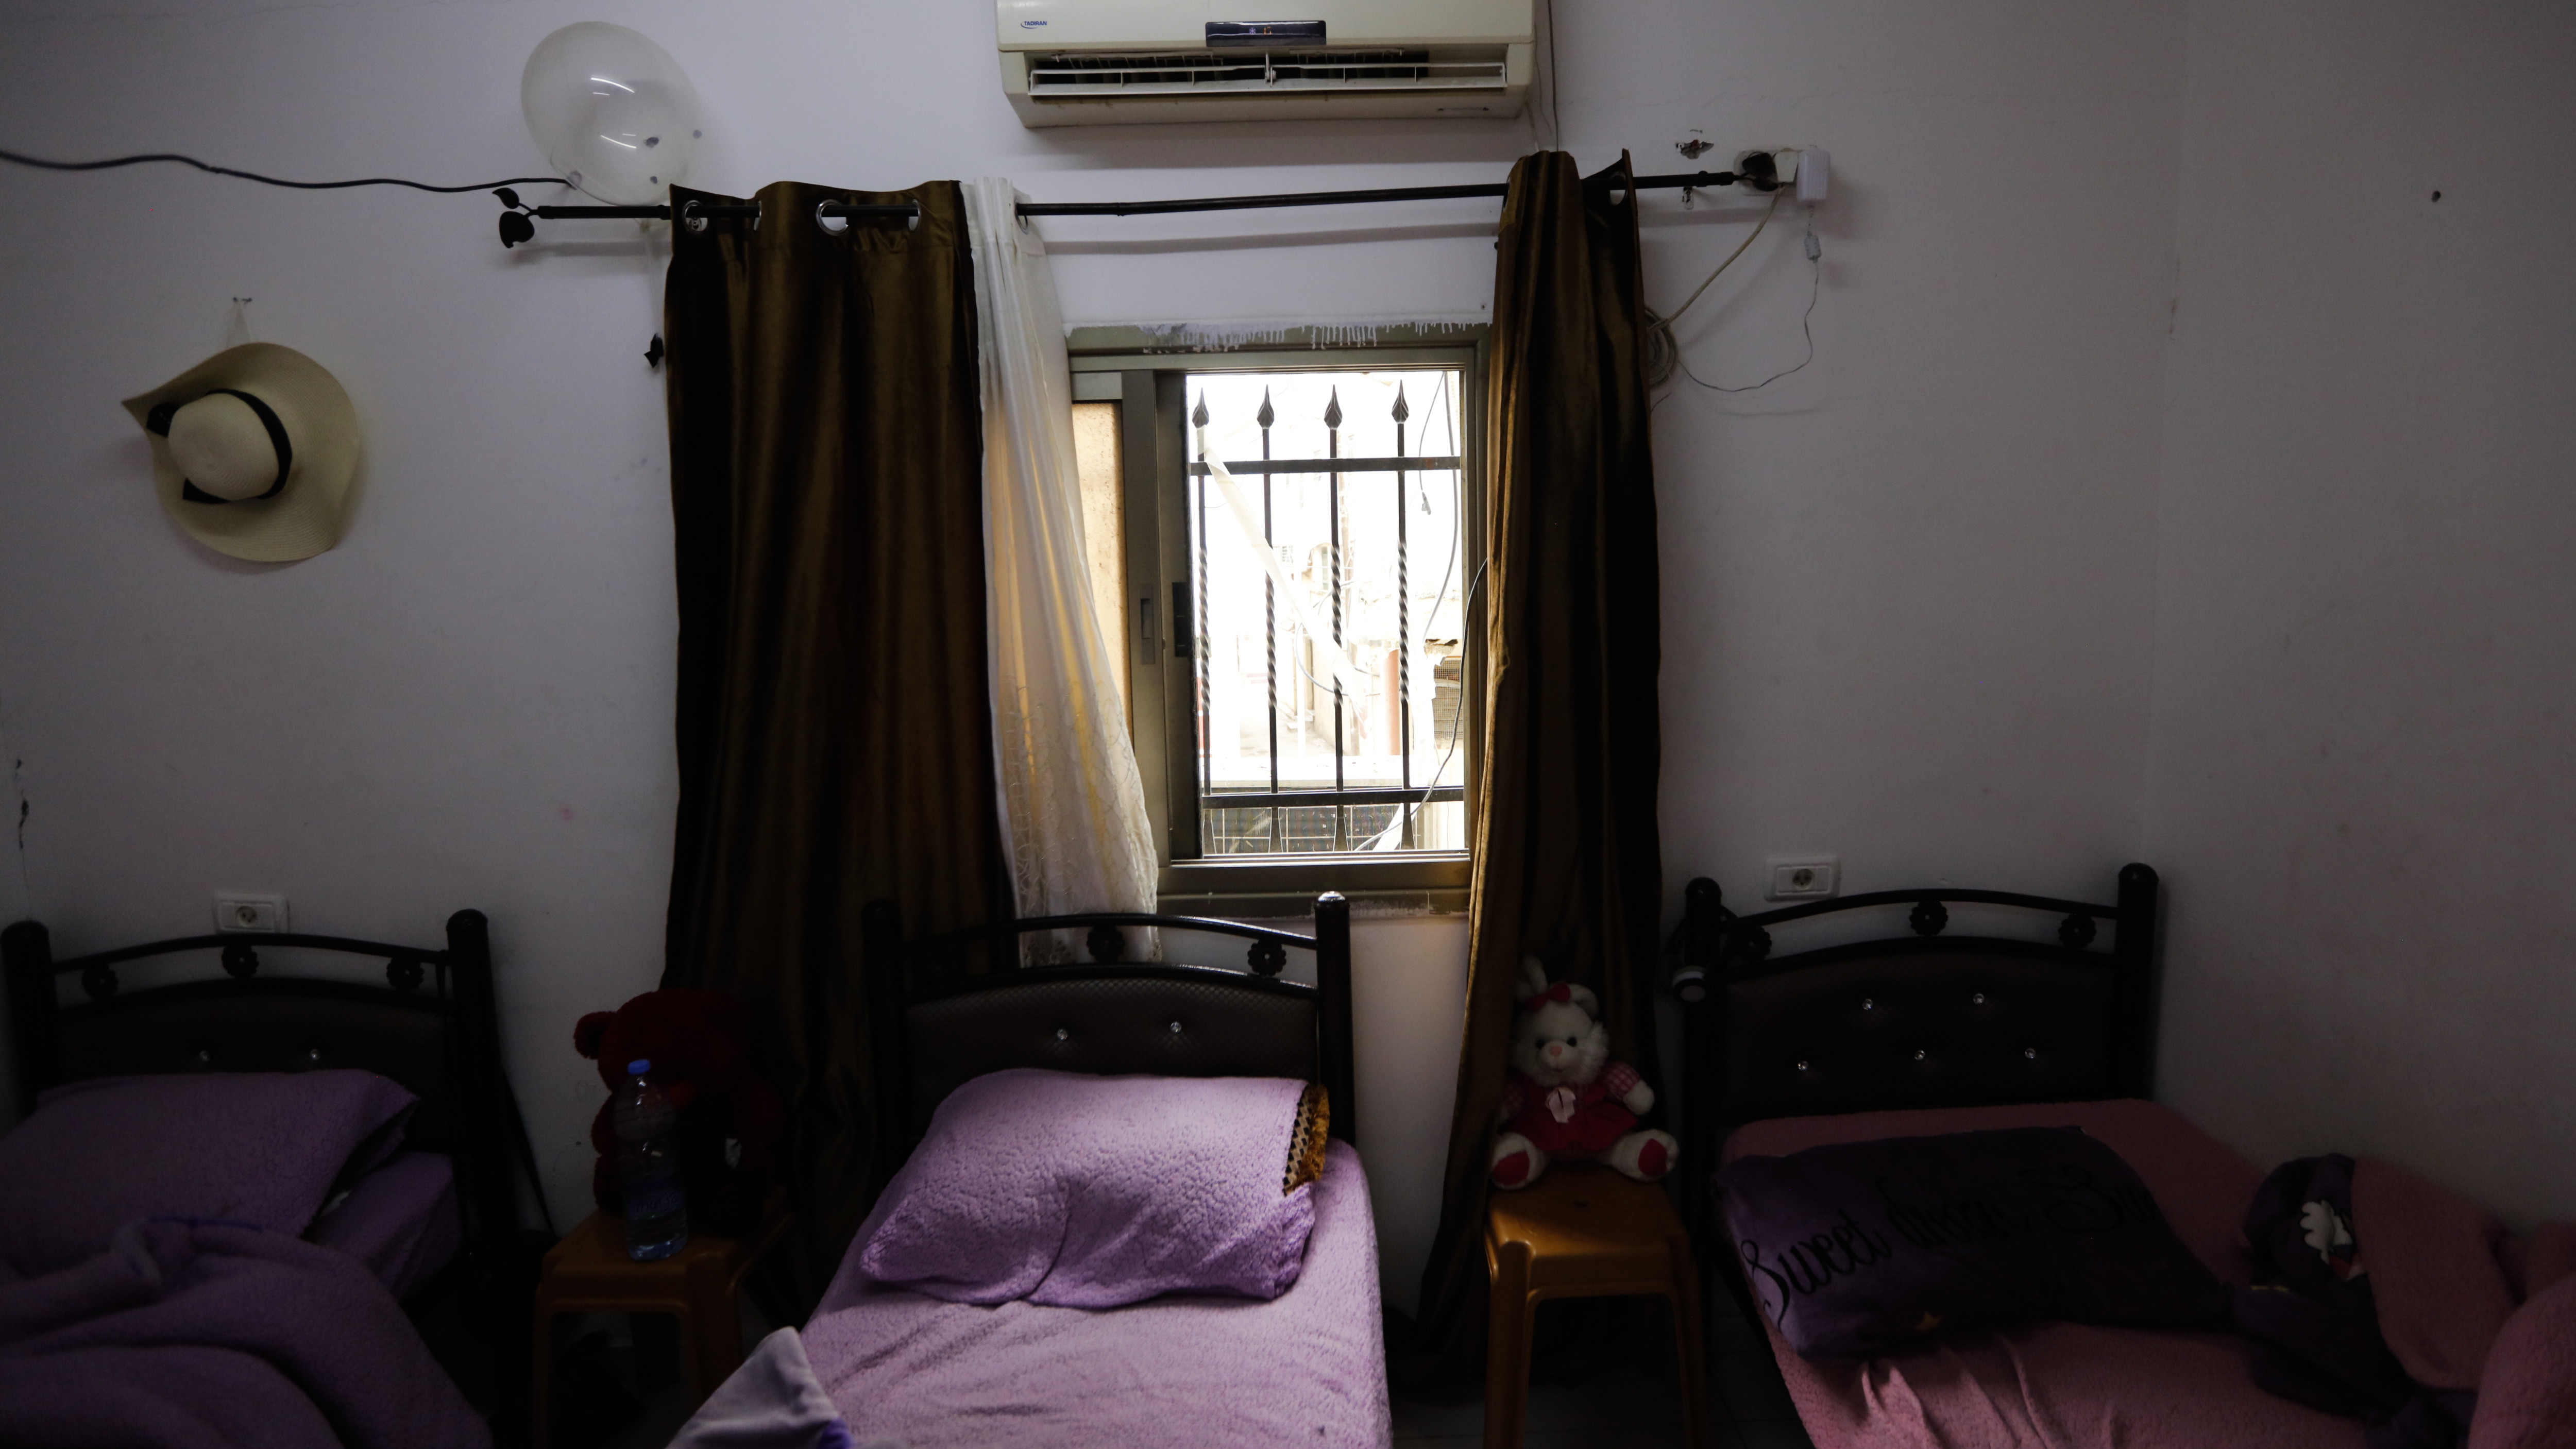 View from Muqbil's bedroom which Israeli soldiers used to station a sniper that killed 17-year-old Mohammed al-Ladda in Aqbat Jabr refugee camp in the West Bank on 1 May 2023 (MEE/Palestine Product)